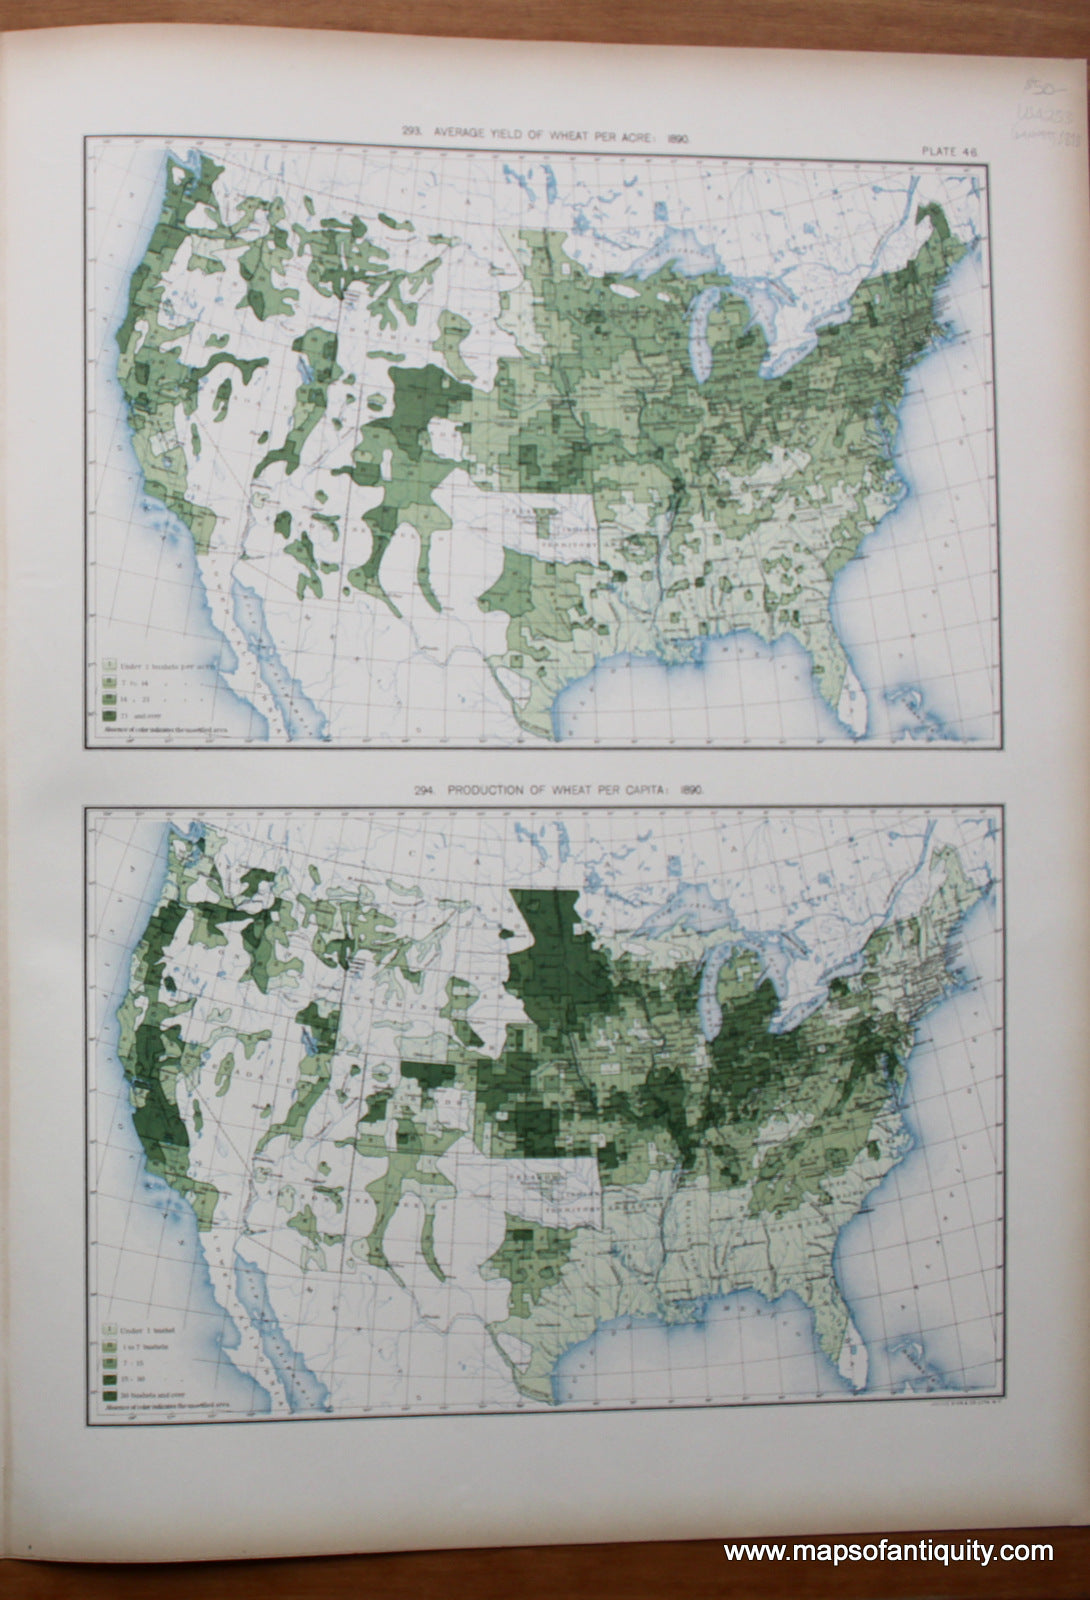 Antique-Printed-Color-Map-Average-Yield-of-Wheat-Per-Acre:-1890/-Production-of-Wheat-Per-Capita:-1890-United-States-United-States-General-1898-Gannett-Maps-Of-Antiquity